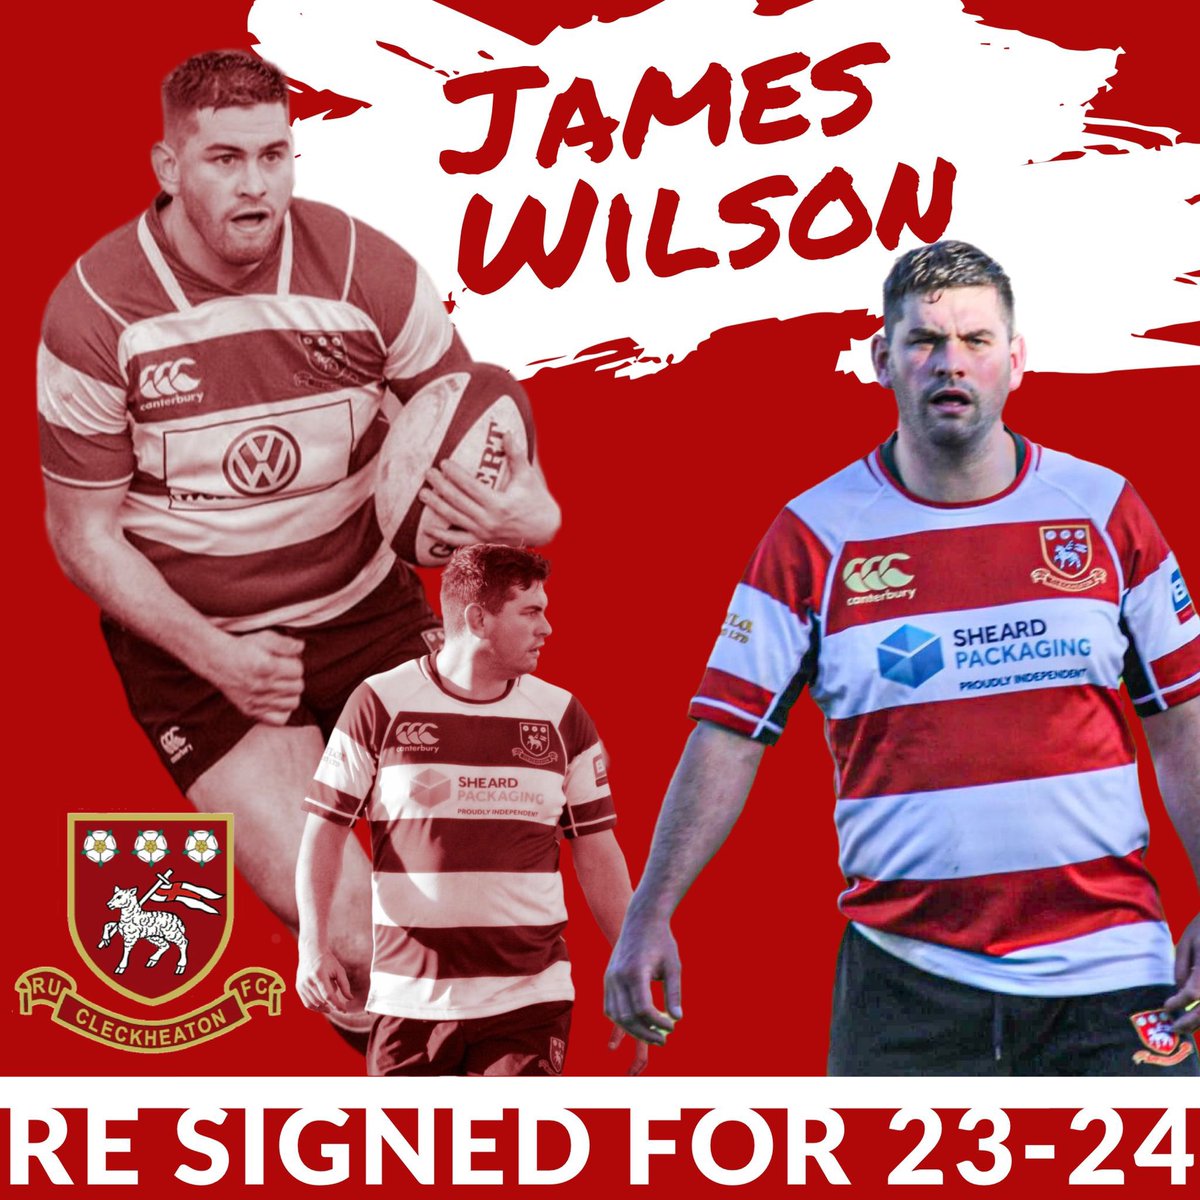 Club stalwart @J_Redders has re-signed for the 23/24 season , looking to reach his 300th cap. 

🐑
🔴⚪️🔴⚪️🔴⚪️